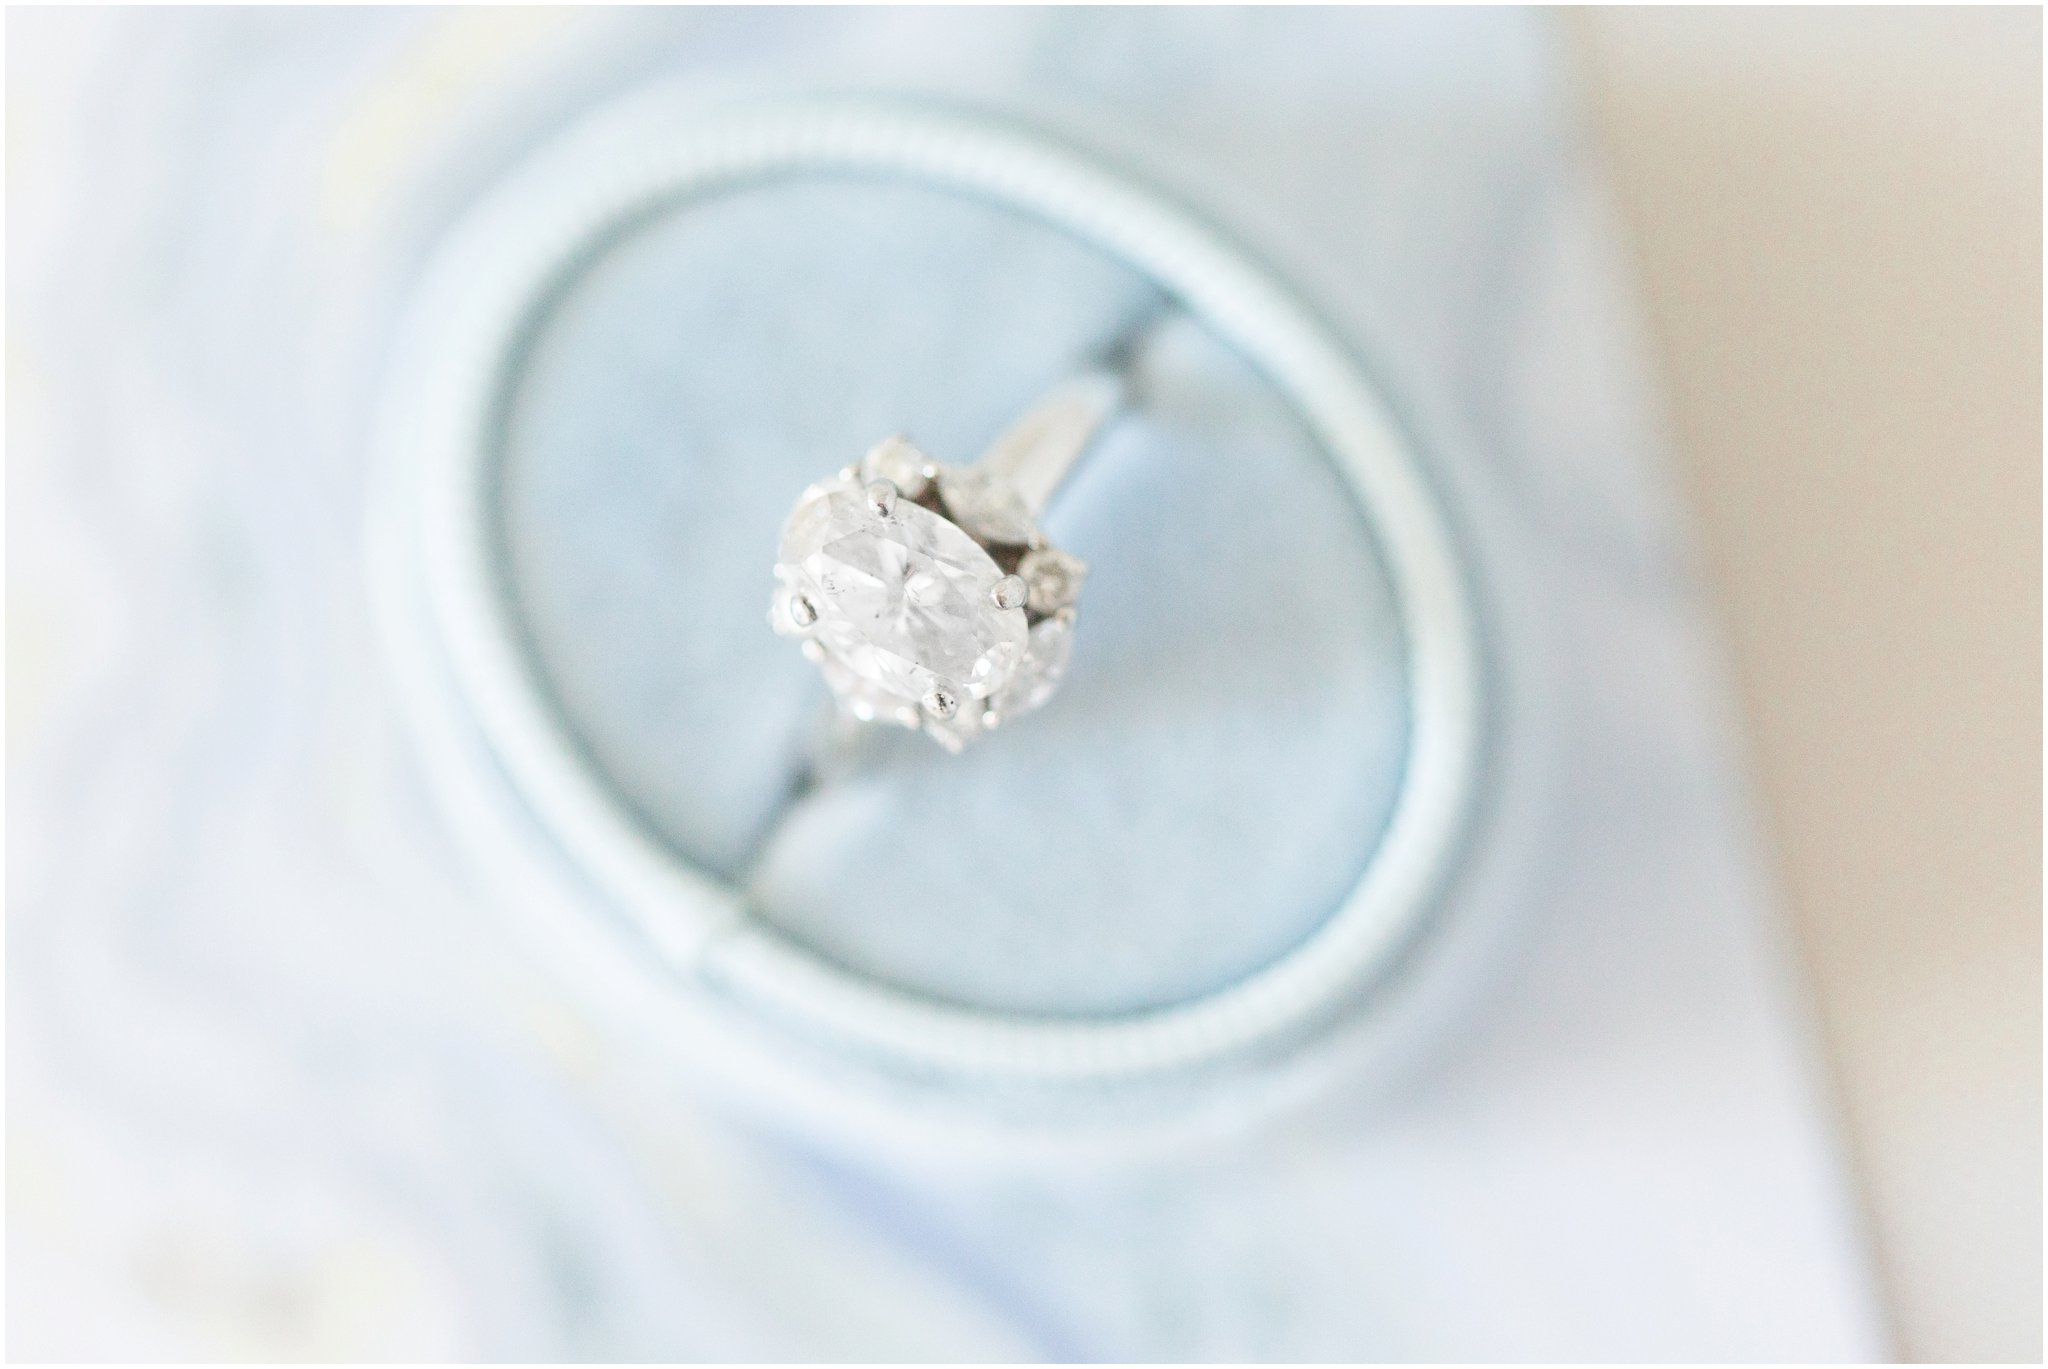 How to photograph the ring and get amazing detail shots at every wedding #photographyeducation #christarenephotography #photographybusiness